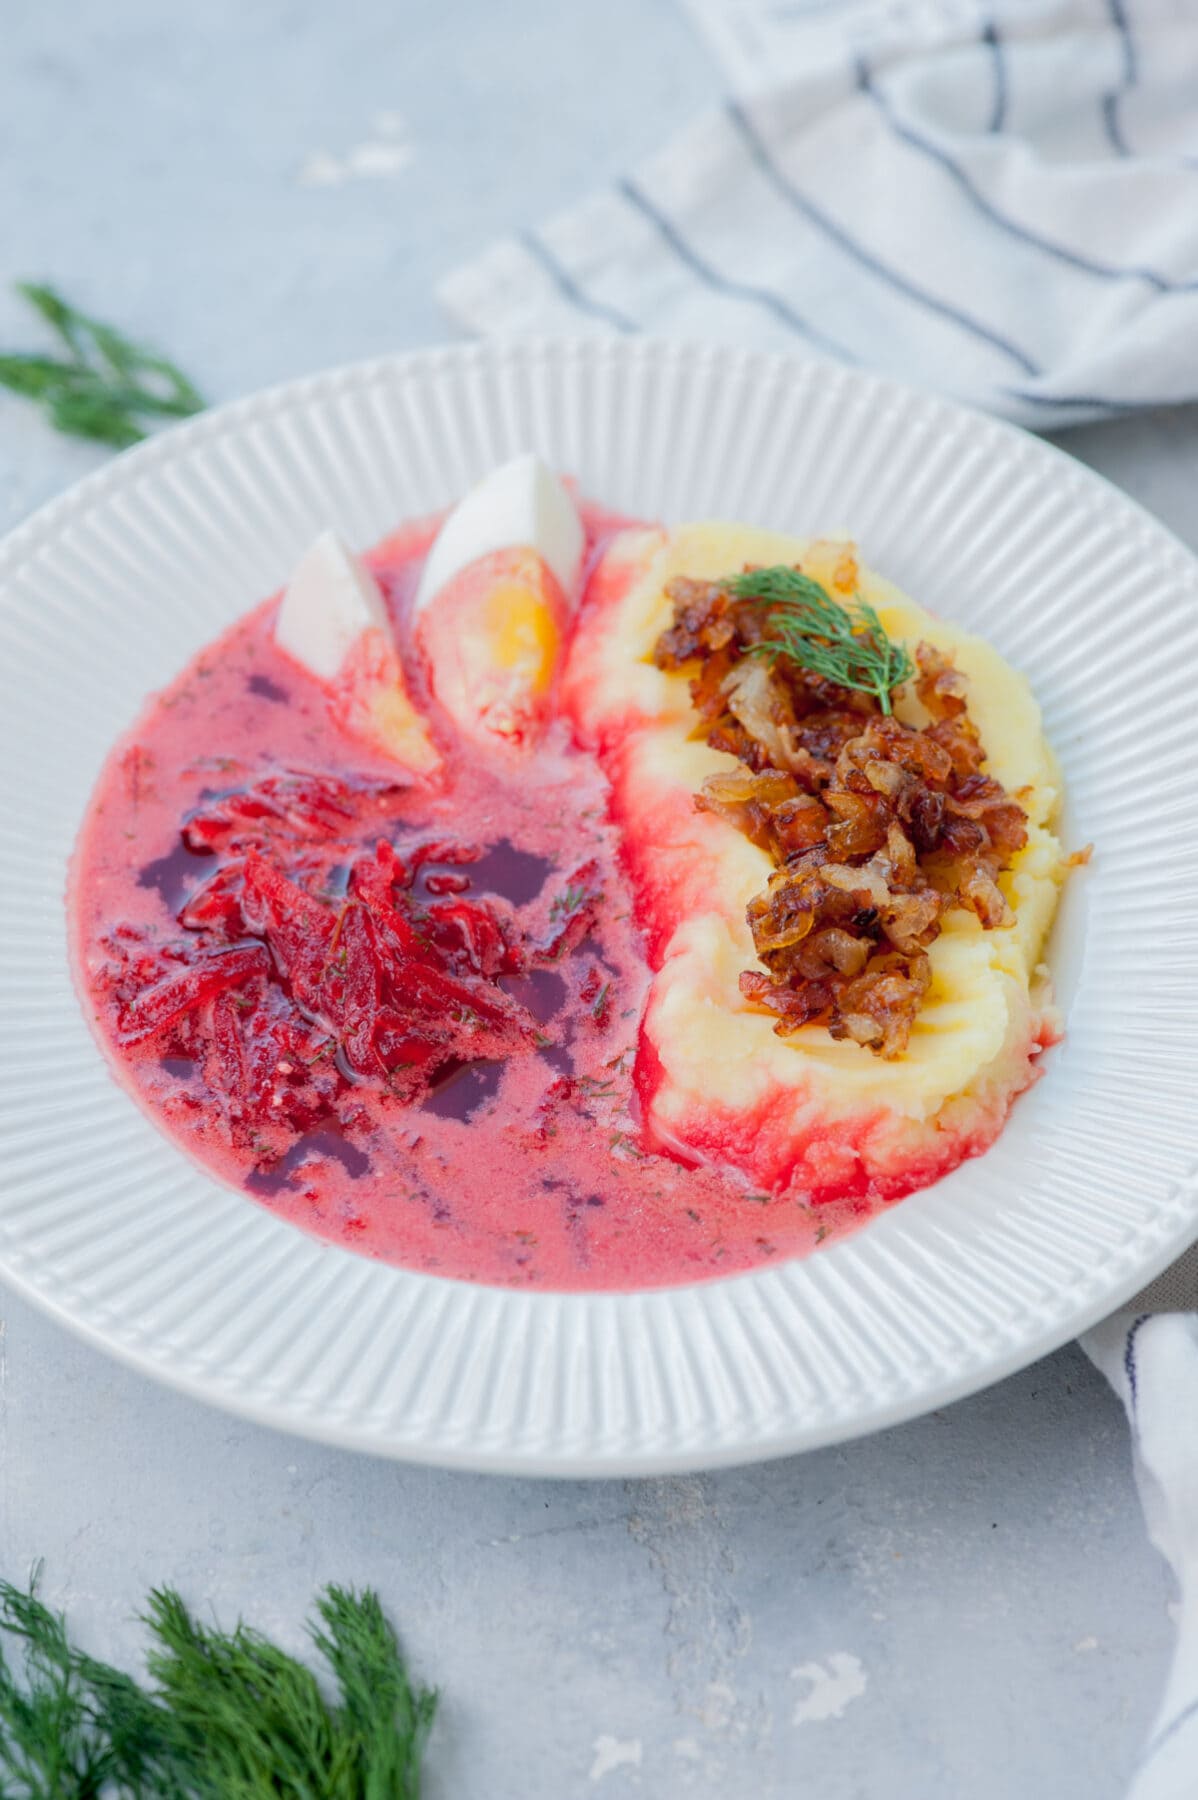 Polish borscht soup served with mashed potatoes, onions, and bacon.